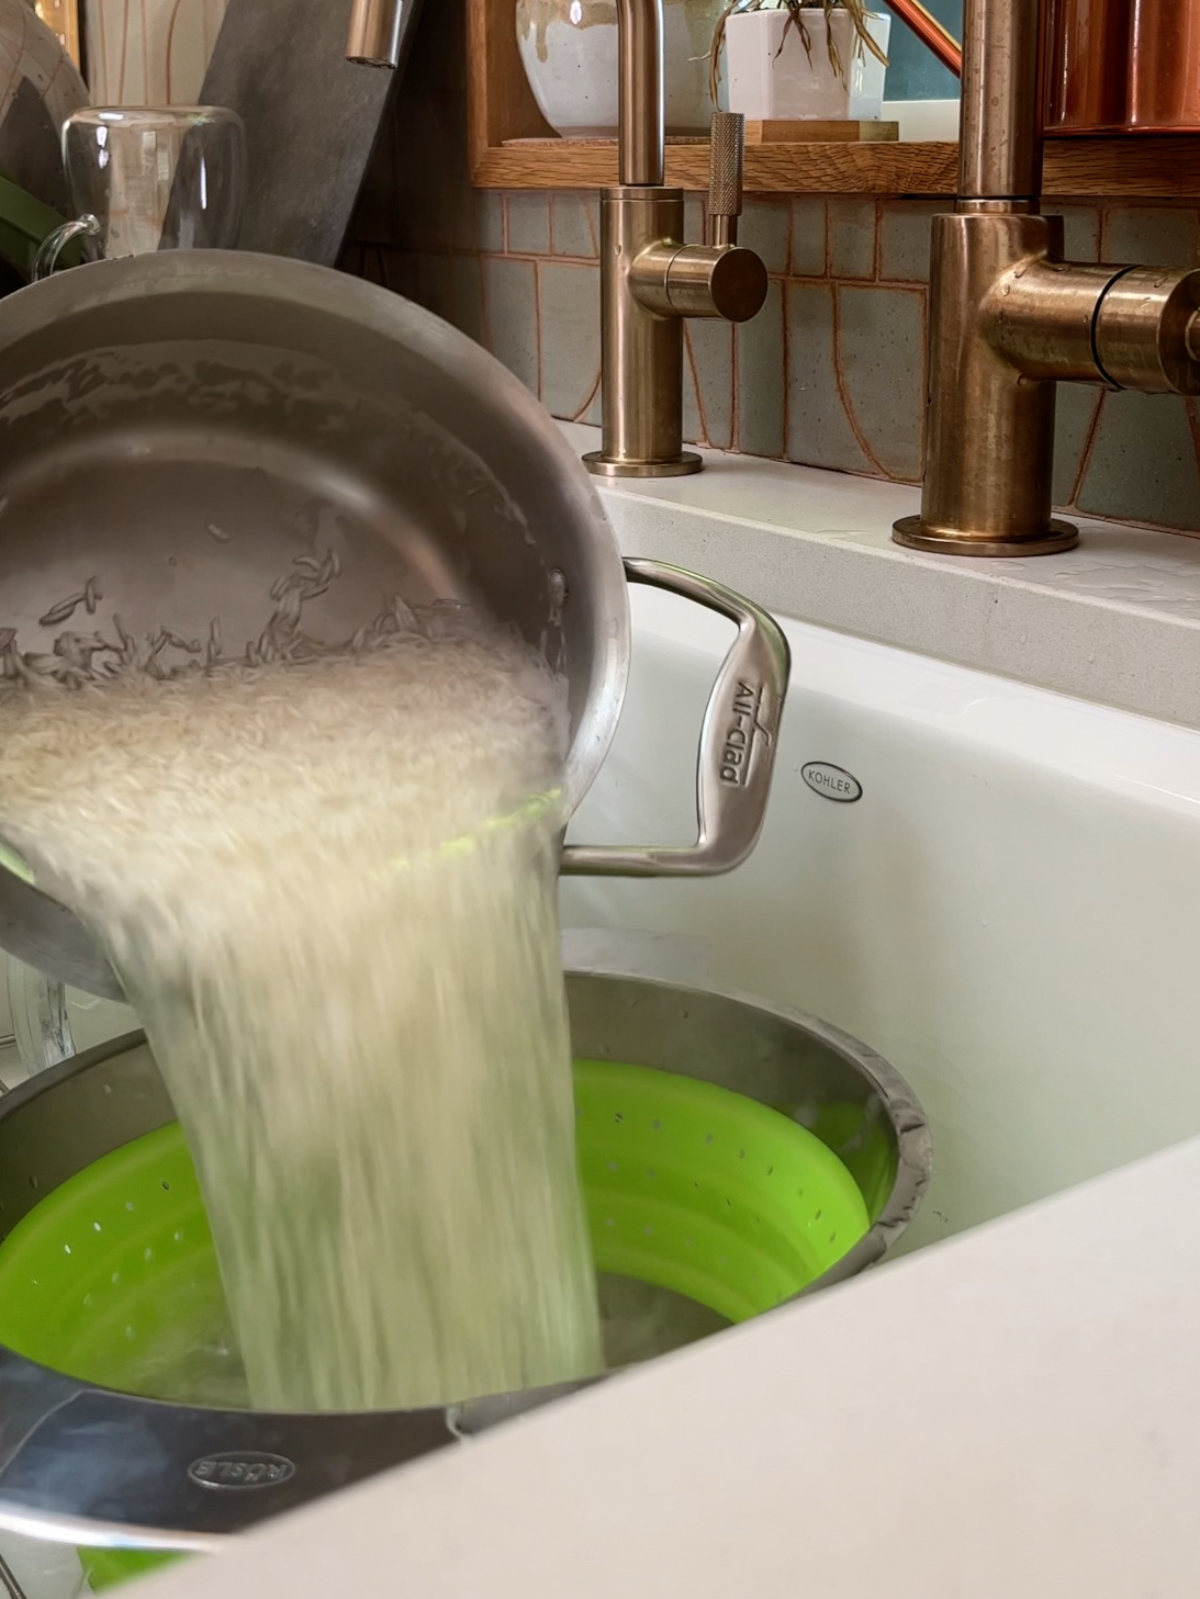 Pouring rice into a green colander from a metal pot.